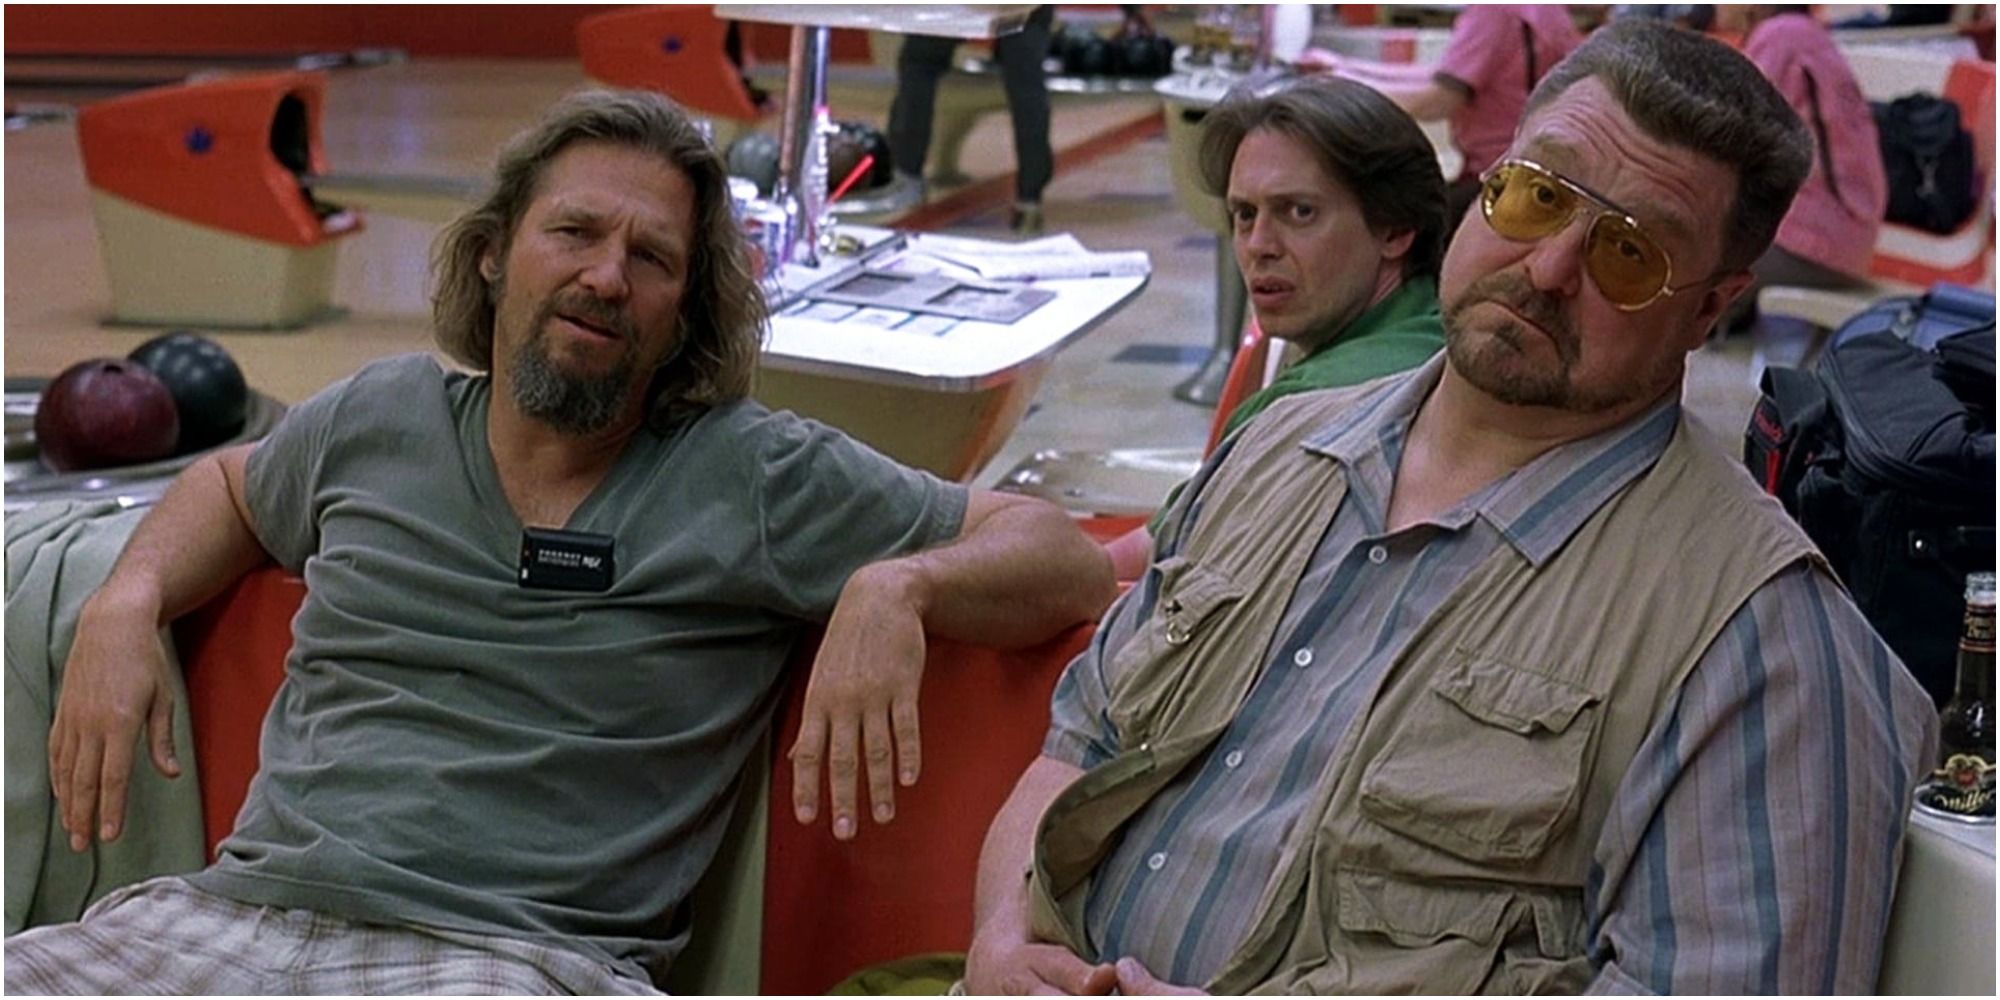 Is The Big Lebowski On Netflix, Hulu Or Prime? Where To Watch Online